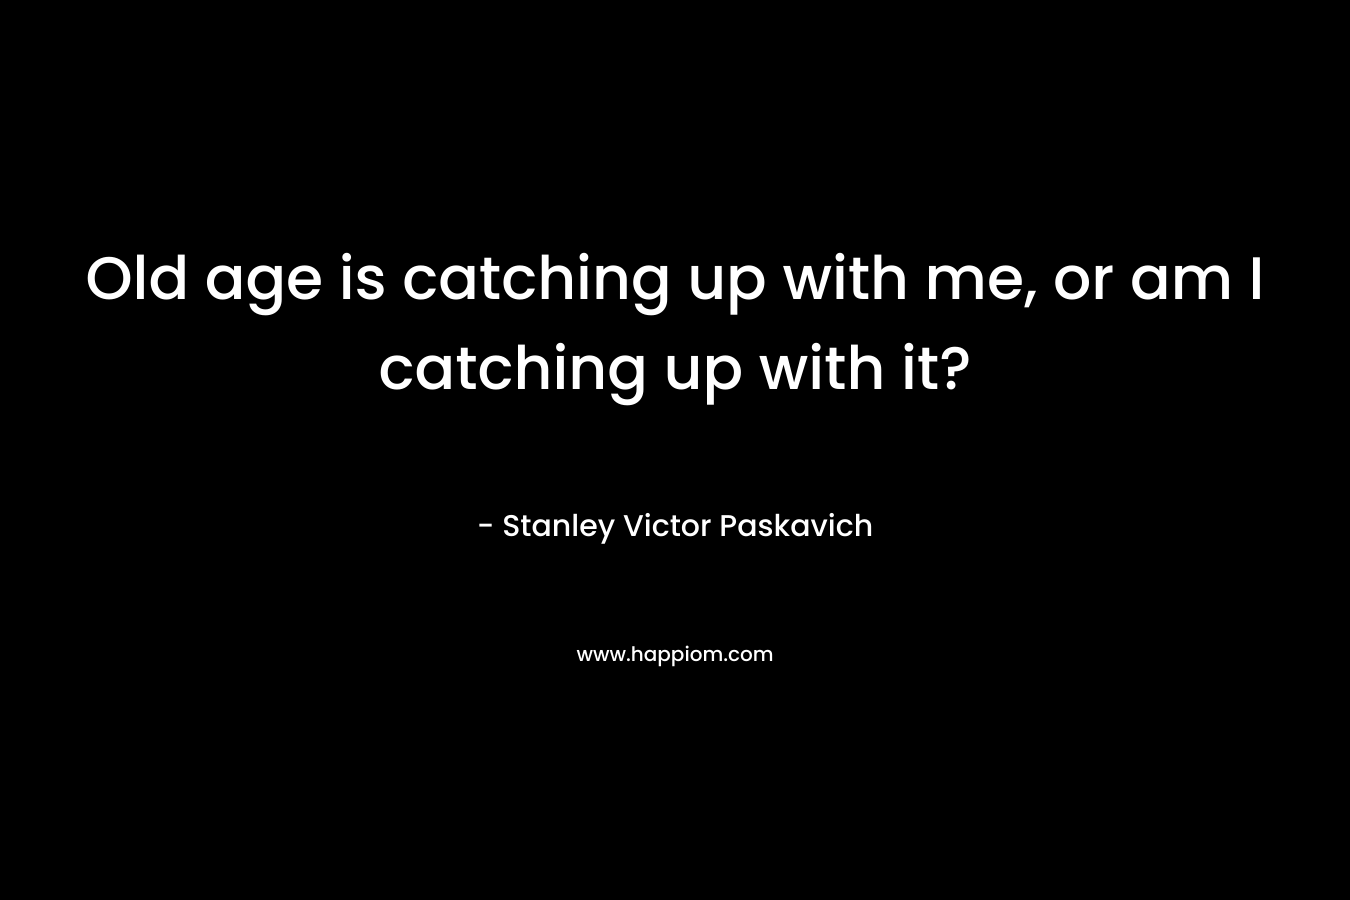 Old age is catching up with me, or am I catching up with it? – Stanley Victor Paskavich